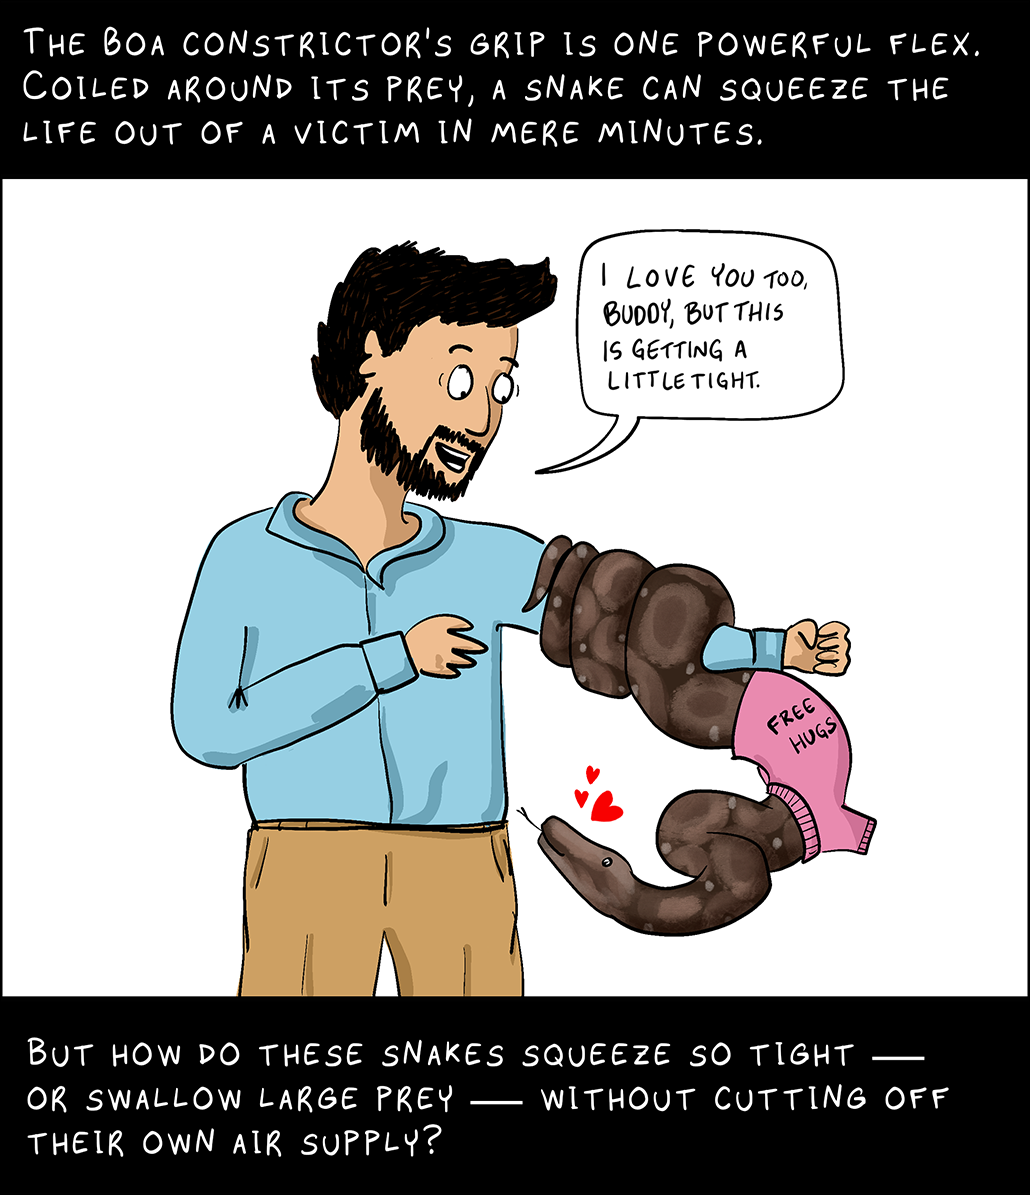 Panel 2. Image: A drawing of a man wearing a blue shirt and brown pants. He has short dark hair and a beard and mustache. He is looking at a boa constrictor wrapped around his arm. The snake is wearing a shirt that says 'Free Hugs' and looking up at the man's face. There are hearts next to the snake. The man is saying 'I love you too, buddy, but this is getting a little tight.' Text (top image): The boa constrictor's grip is one powerful flex. Coiled around it's prey, a snake can squeeze the life out of a victim in mere minutes. Text (bottom image): But how do these snakes squeeze so tight - or swallow large prey - without cutting off their own air supply?